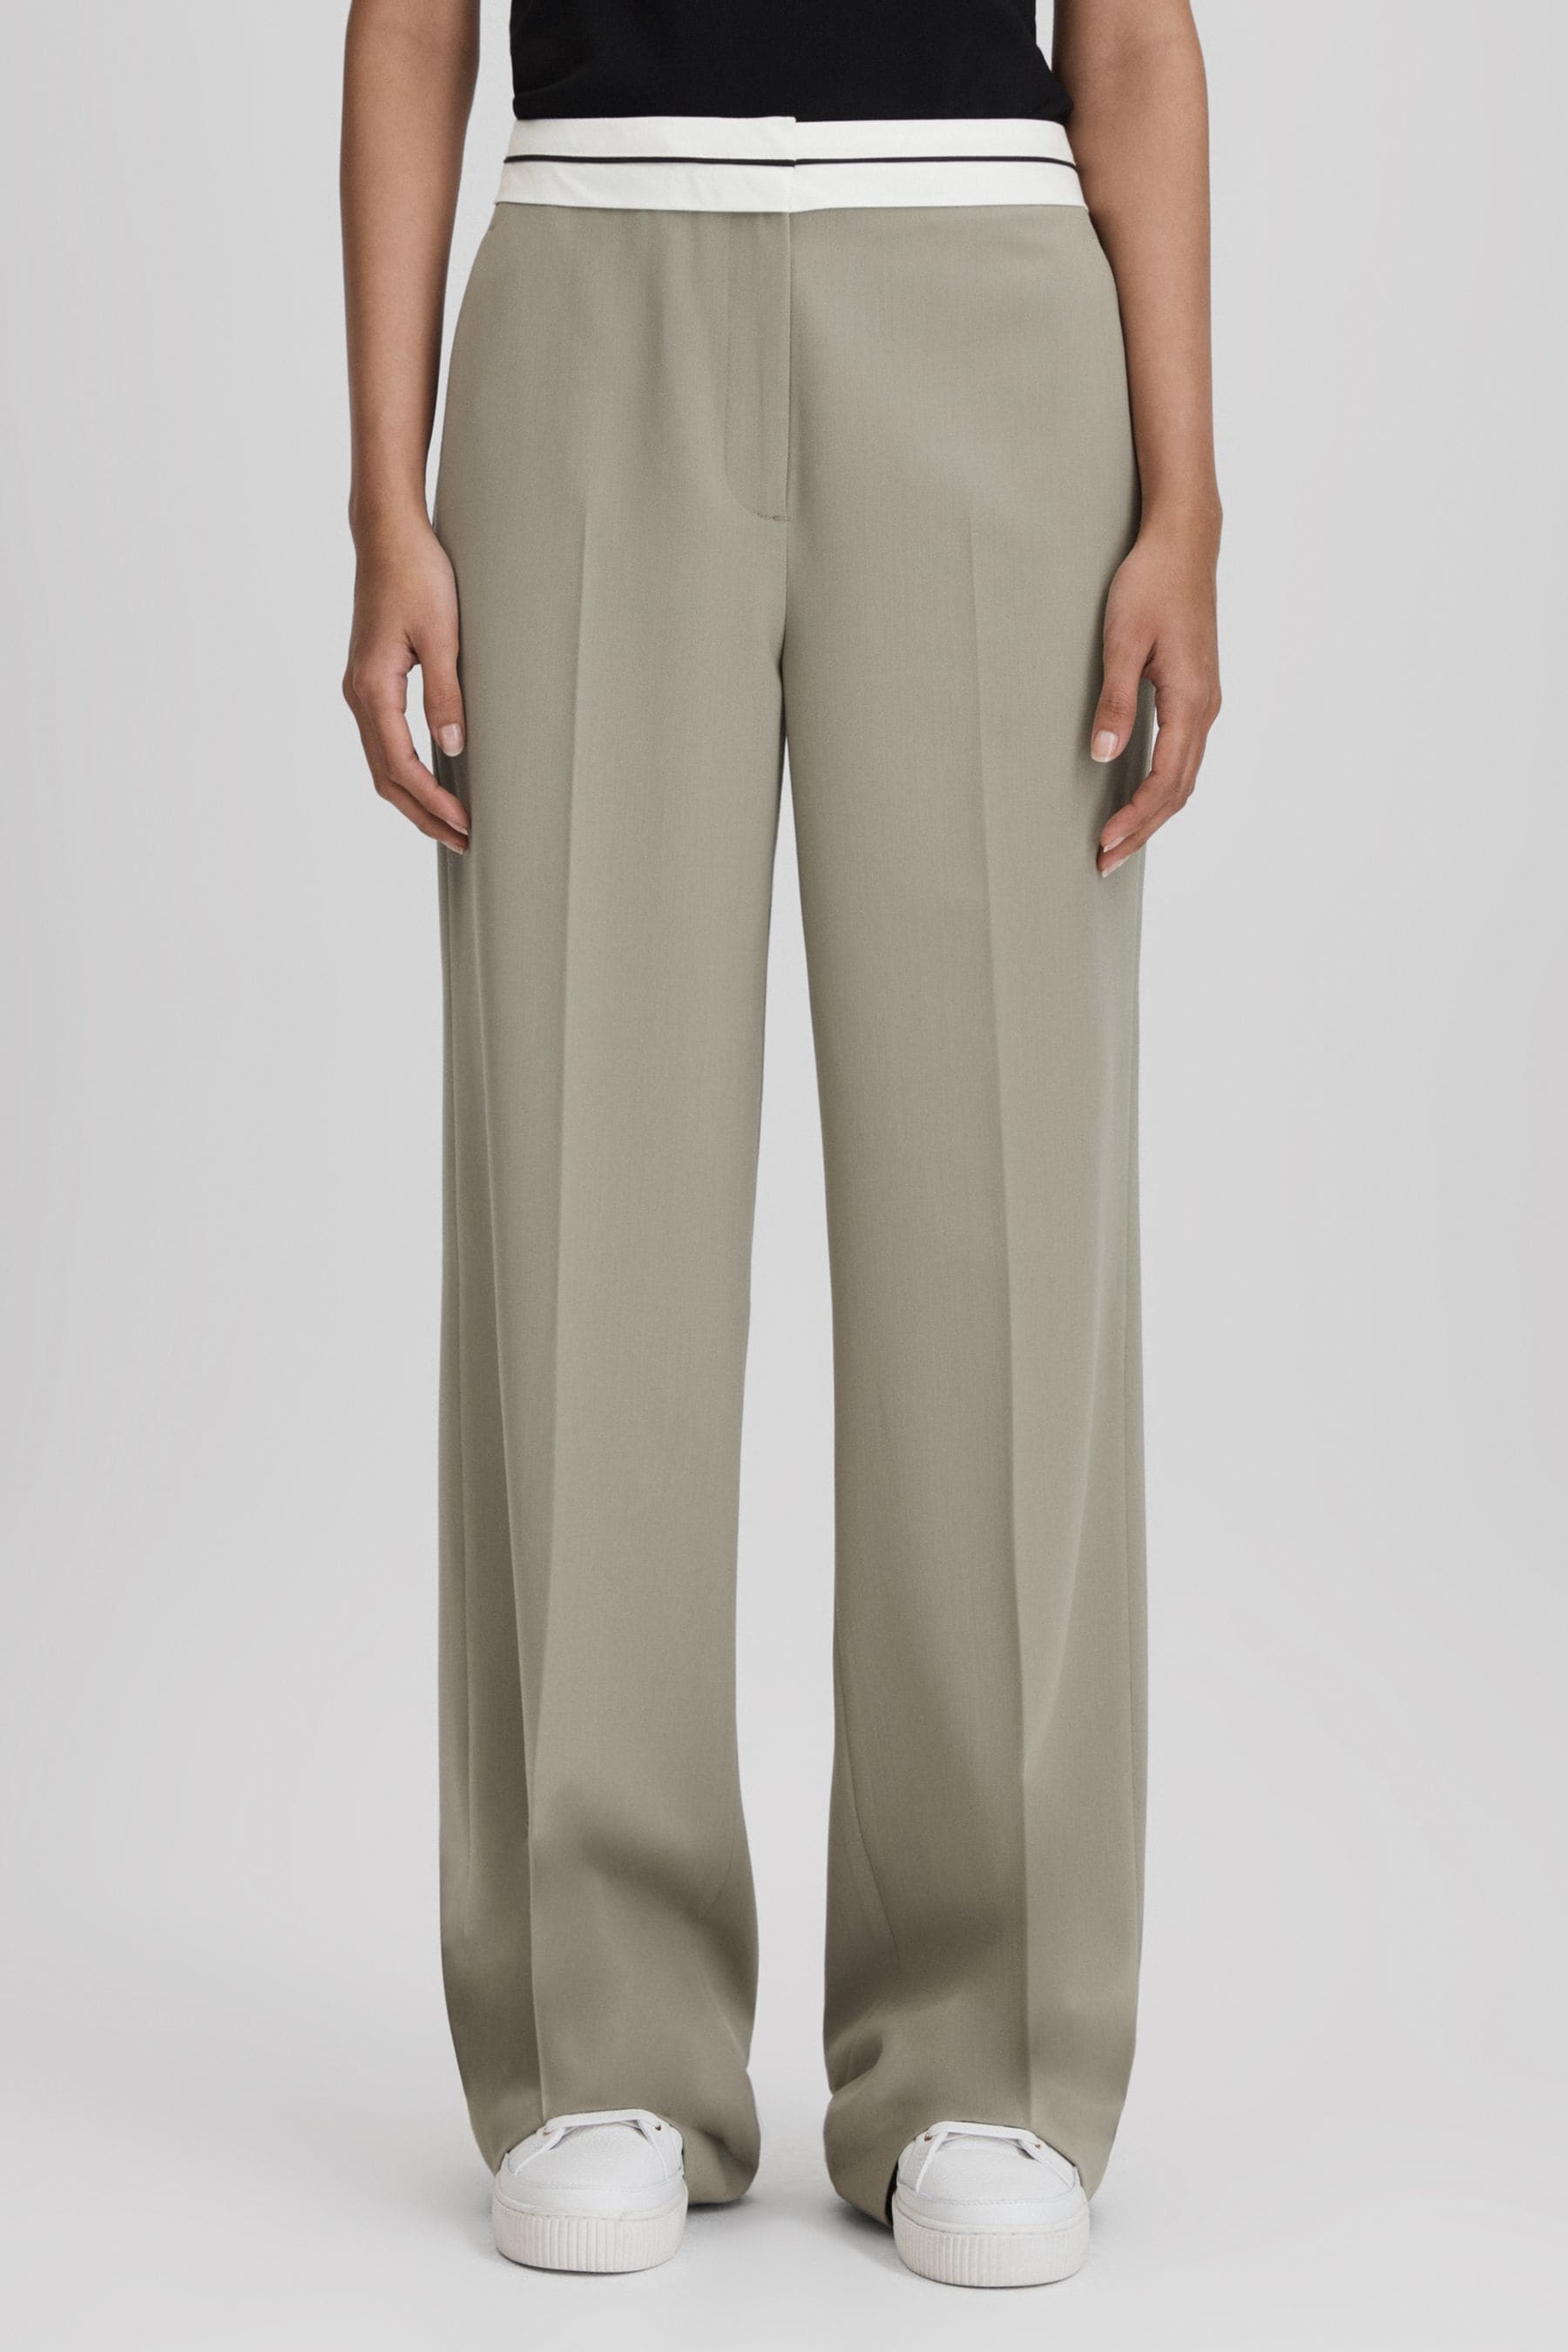 Shop Reiss Whitley - Green Contrast Waistband Wide Leg Suit Trousers, Uk 4 L